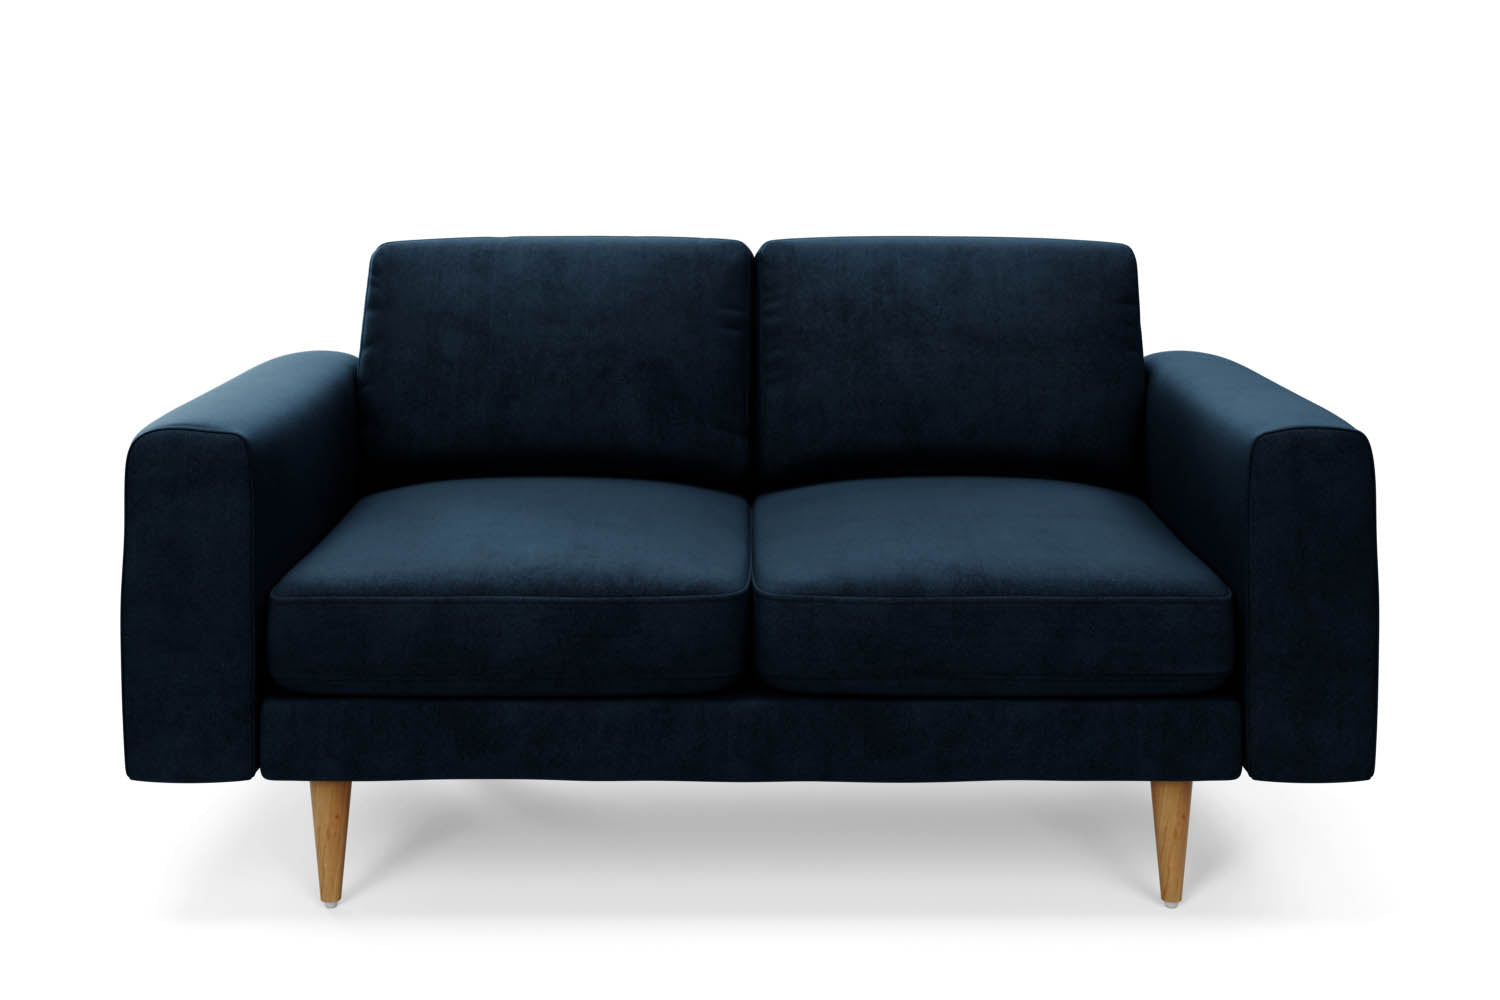 SNUG | The Big Chill 2 Seater Sofa in Deep Blue variant_40837173510192